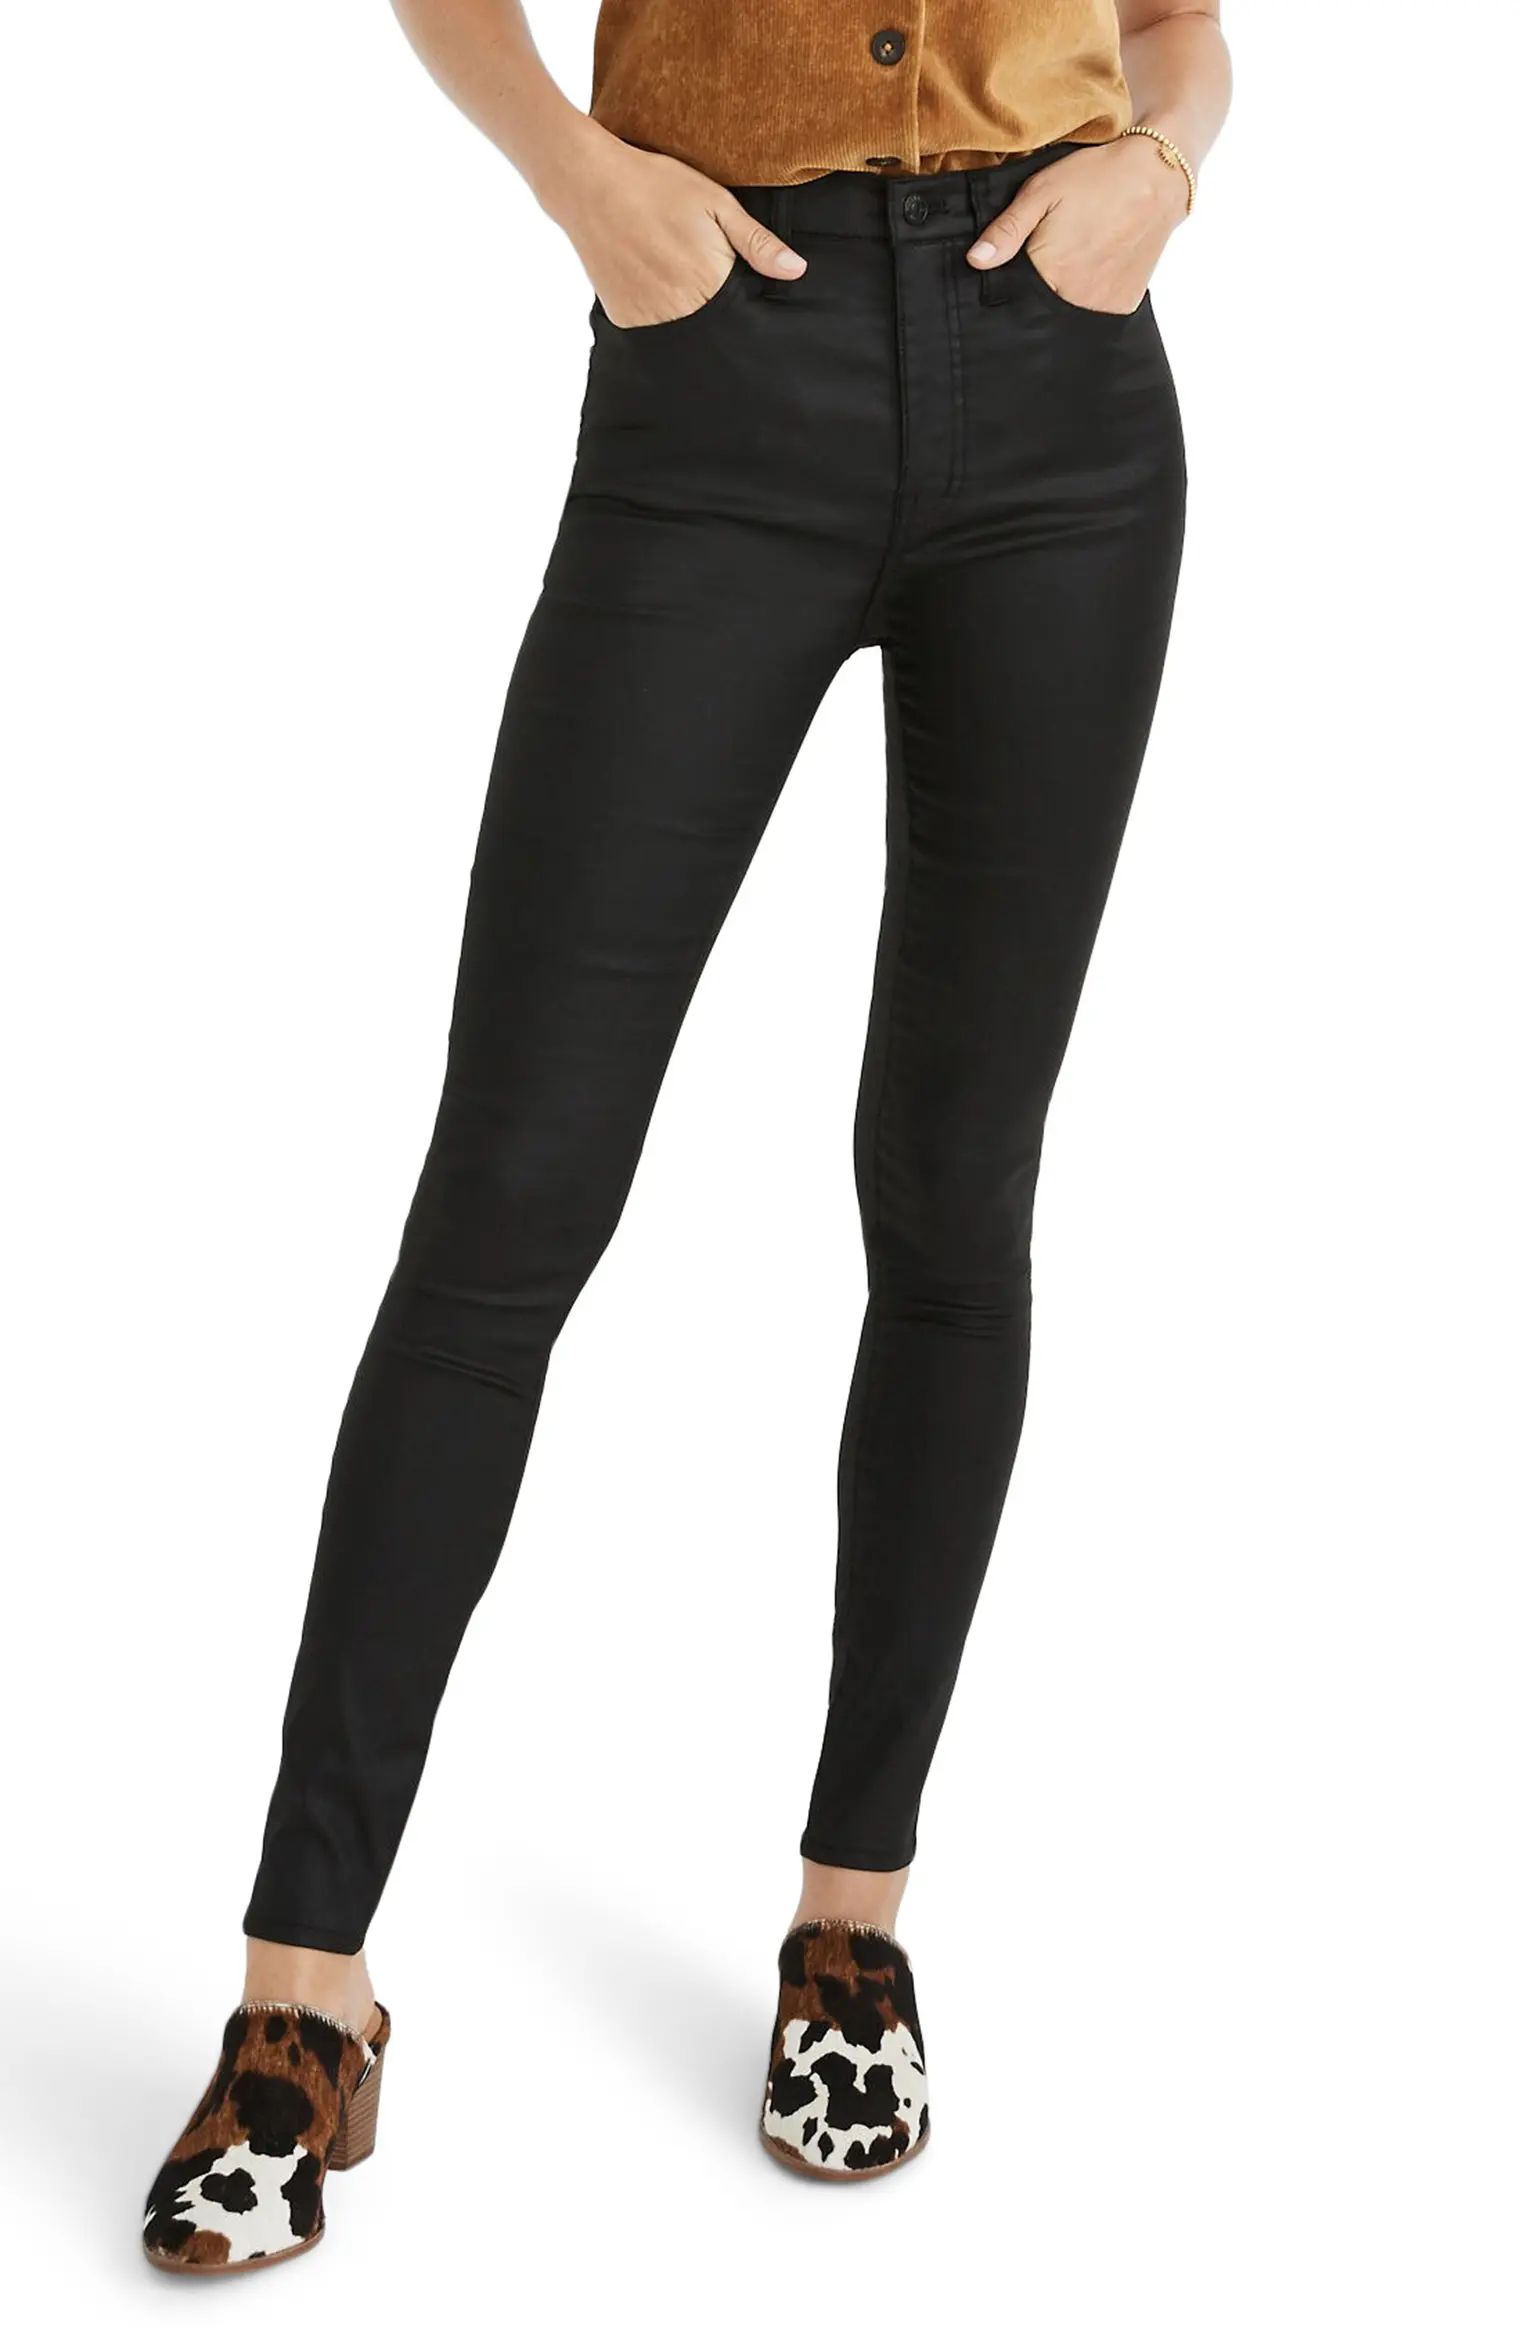 10 Coated Edition High Waist Skinny Jeans | Nordstrom